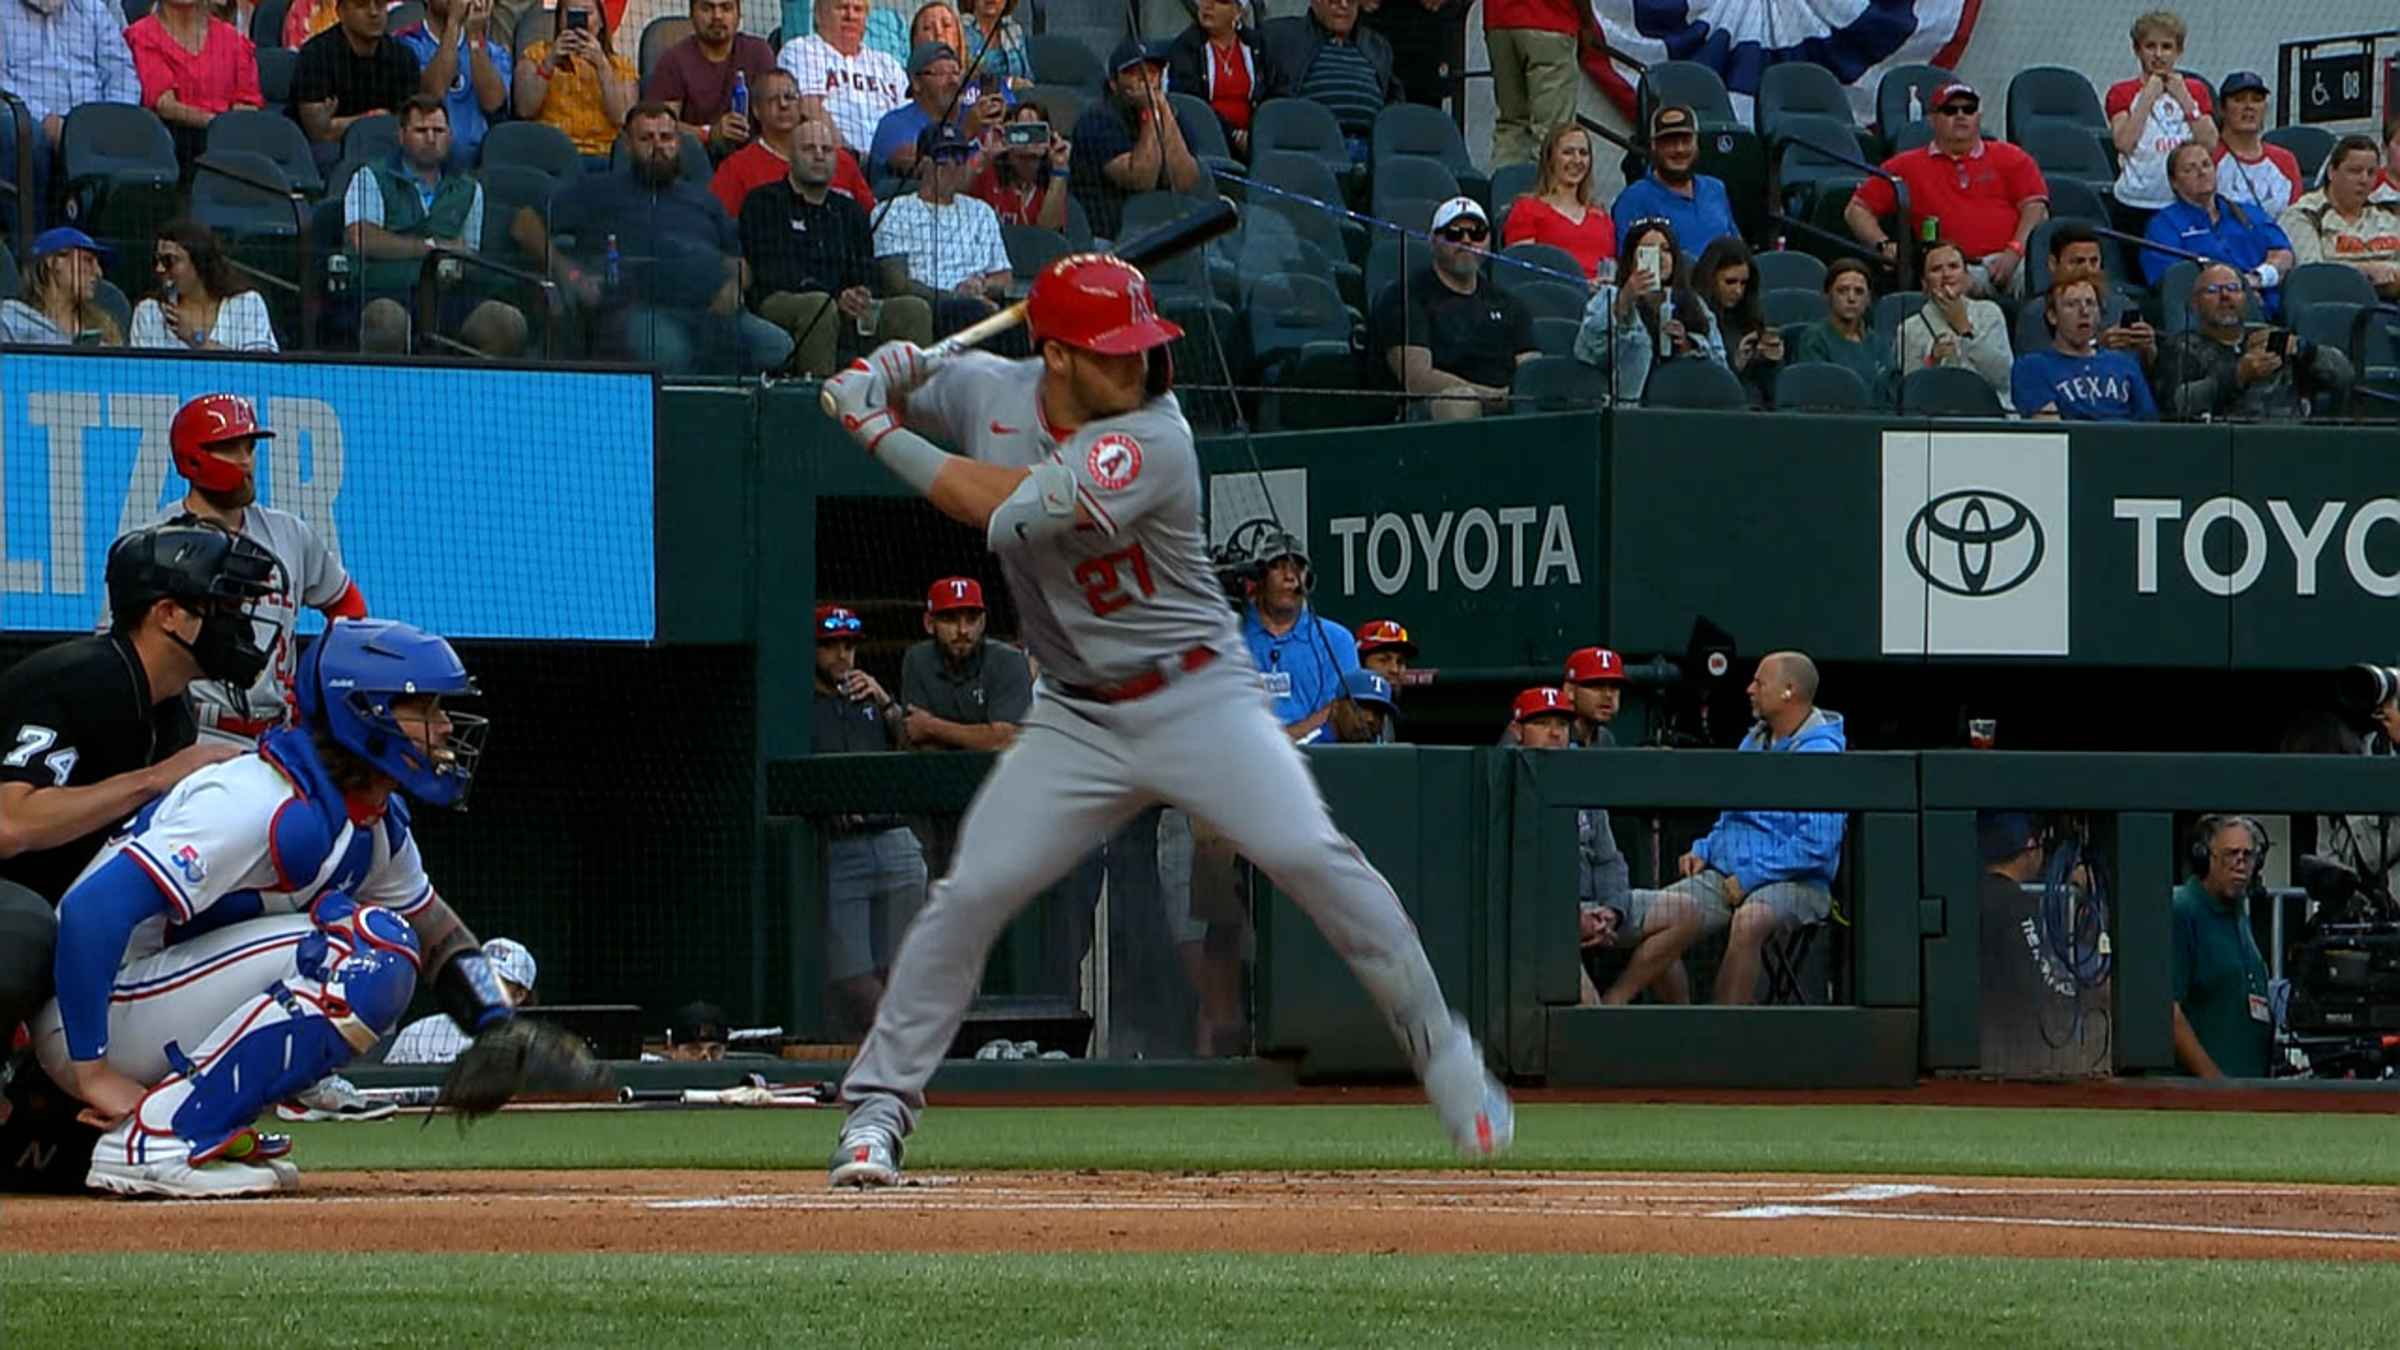 Mike Trout homers are back! His first HR of 2022 goes 445 feet